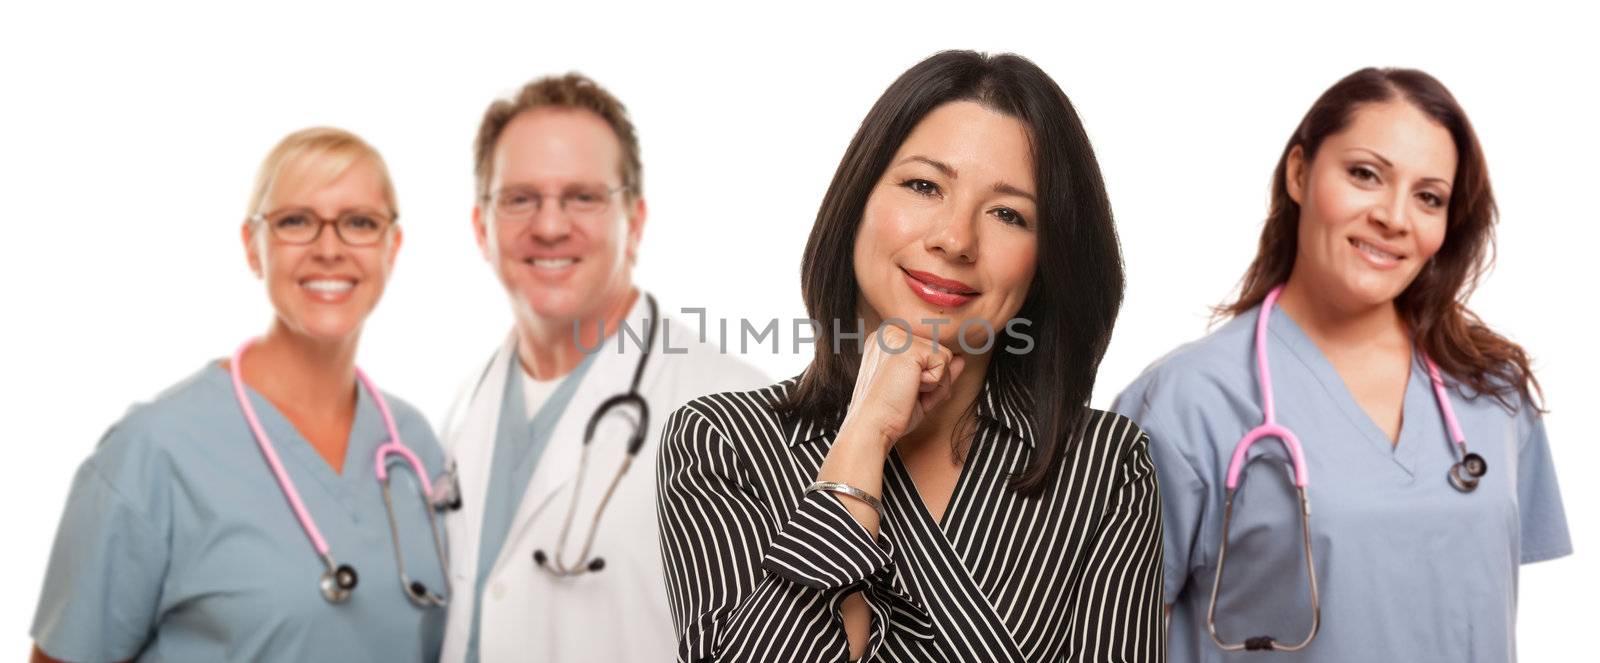 Hispanic Woman with Male and Female Doctor or Nurse by Feverpitched